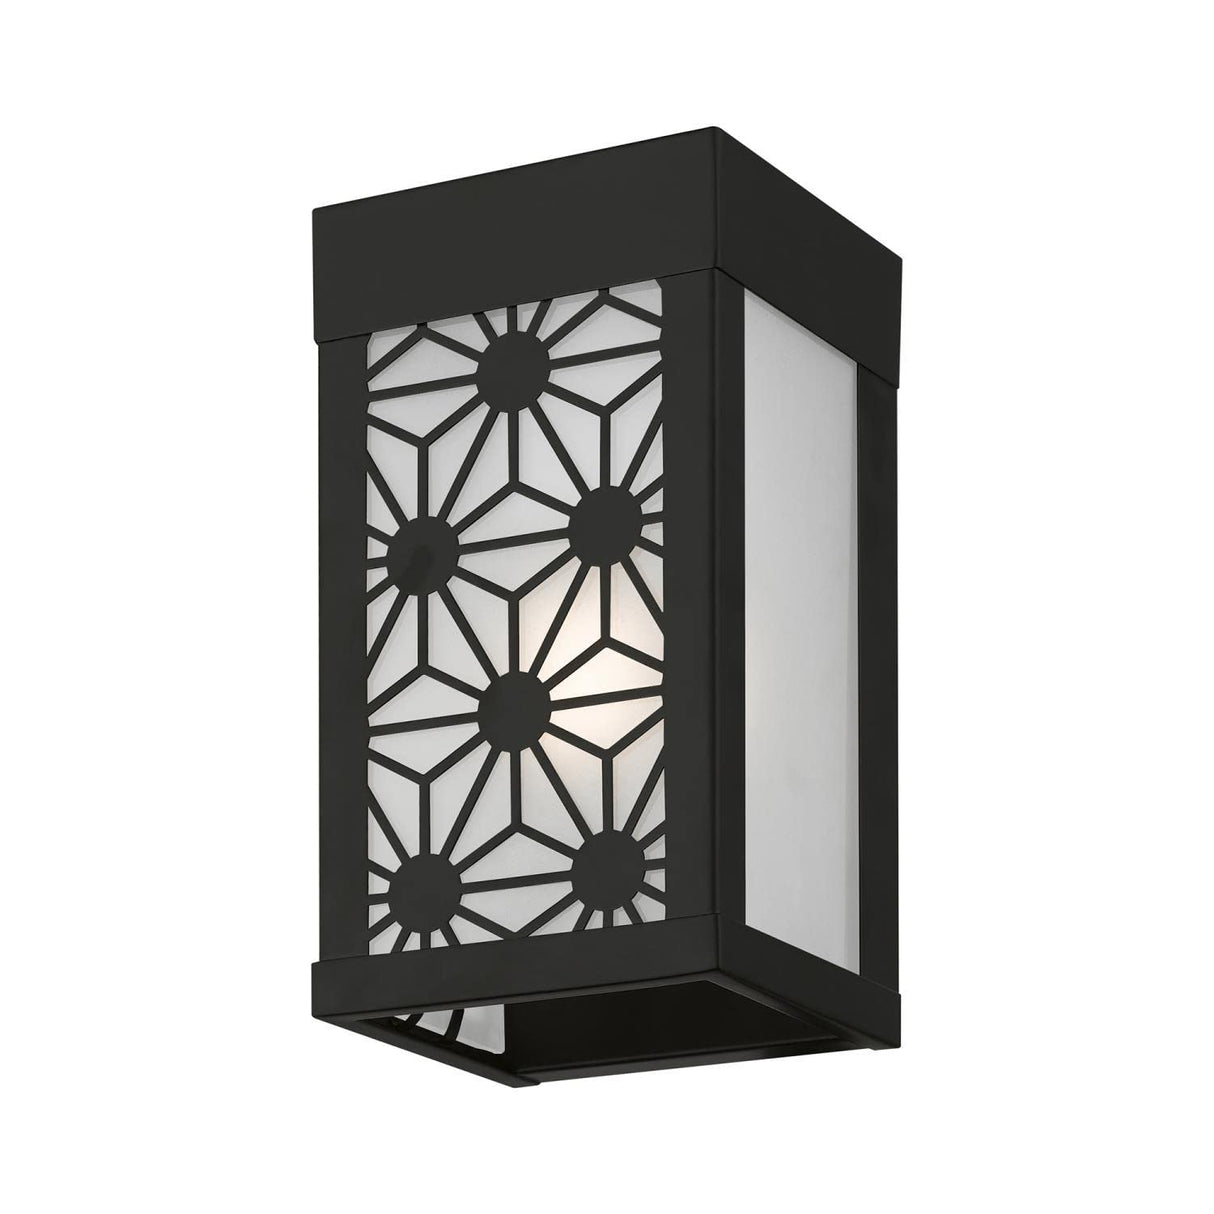 Livex Lighting 24321-04 Berkeley - 1 Light Small Outdoor ADA Wall Sconce in Nordic Style-8.5 Inches Tall and 4.5 Inches Wide, Finish Color: Black